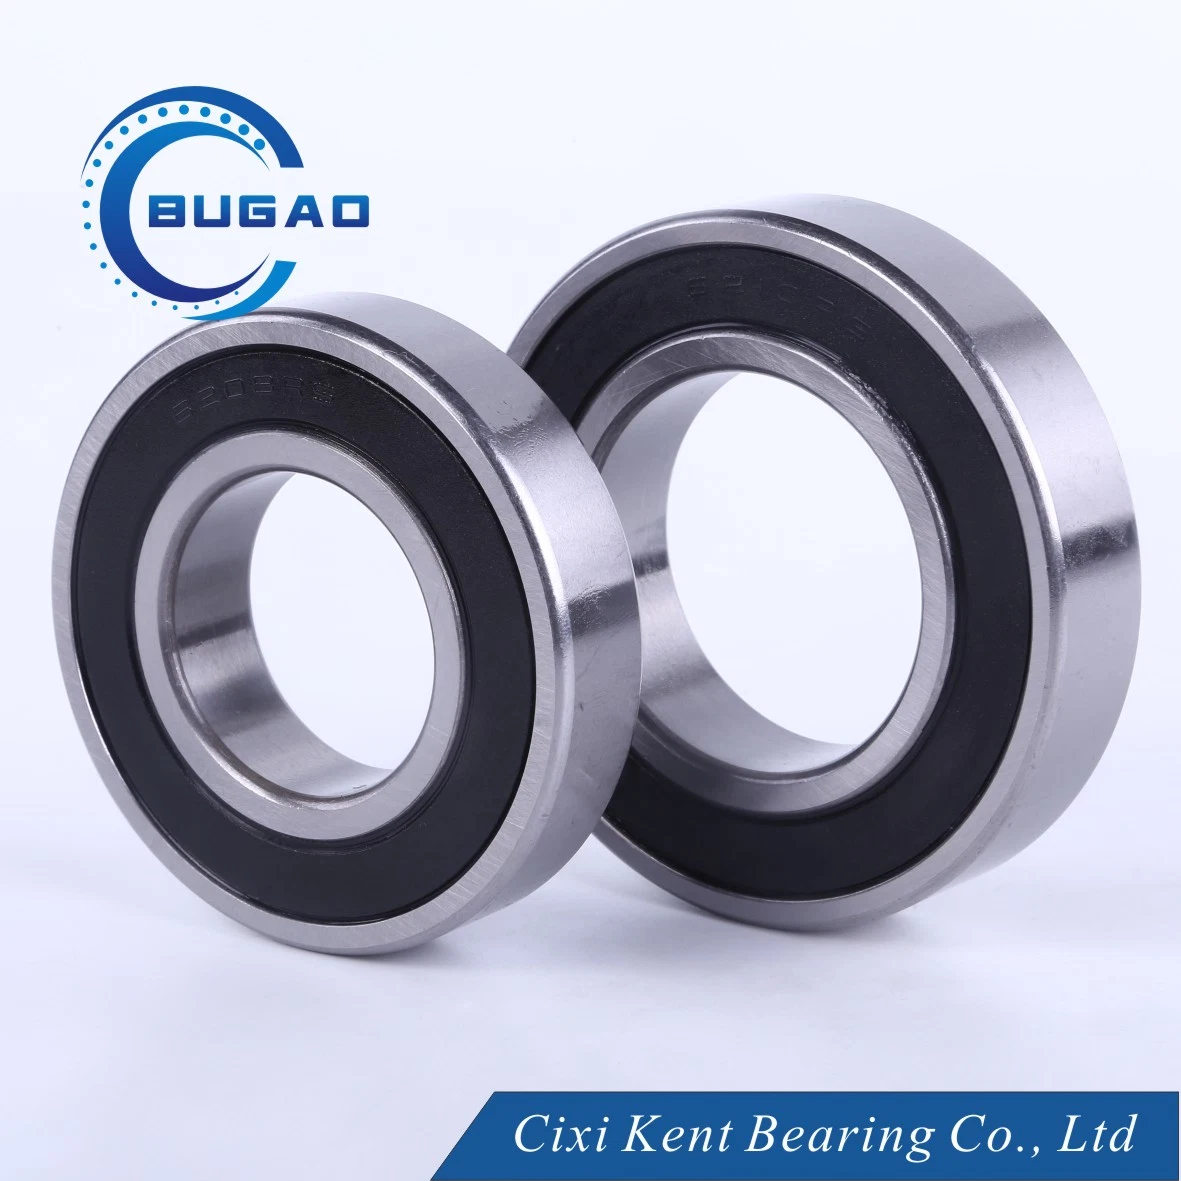 Universal Bearing Hardware Parts for Auto Spare Parts 6307 6308 6309 6310 6311 6312 Zz 2RS RS Bearing